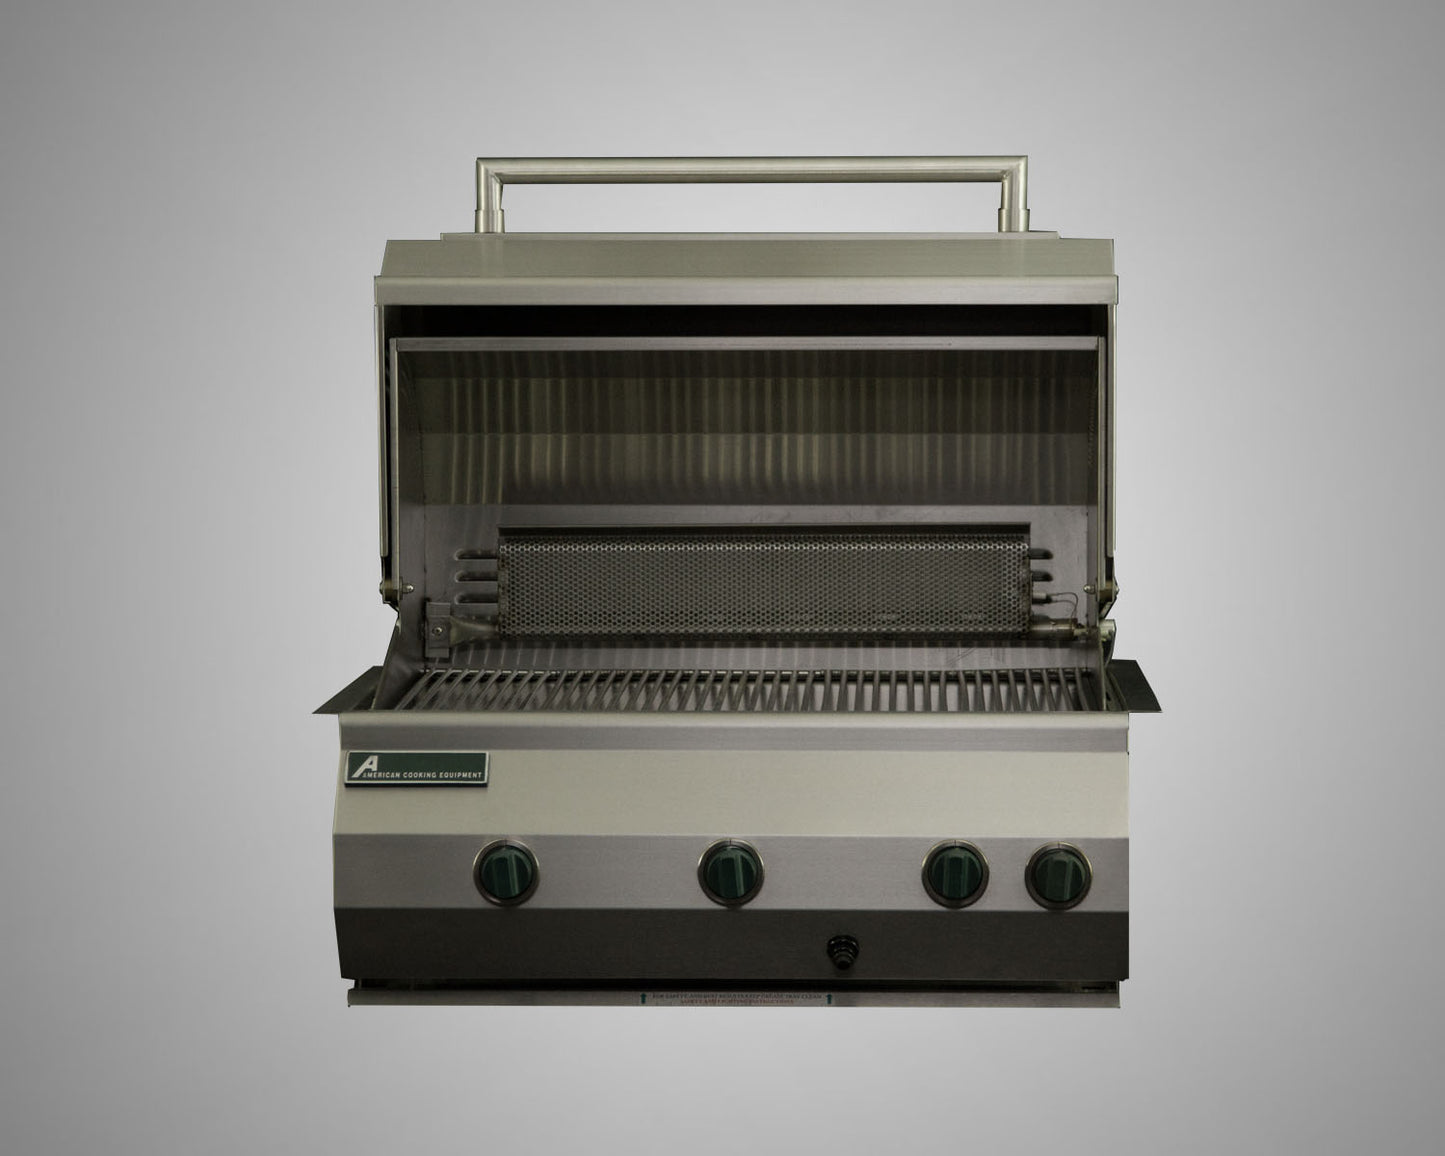 6 Burner Built-In Grill with Rotisserie